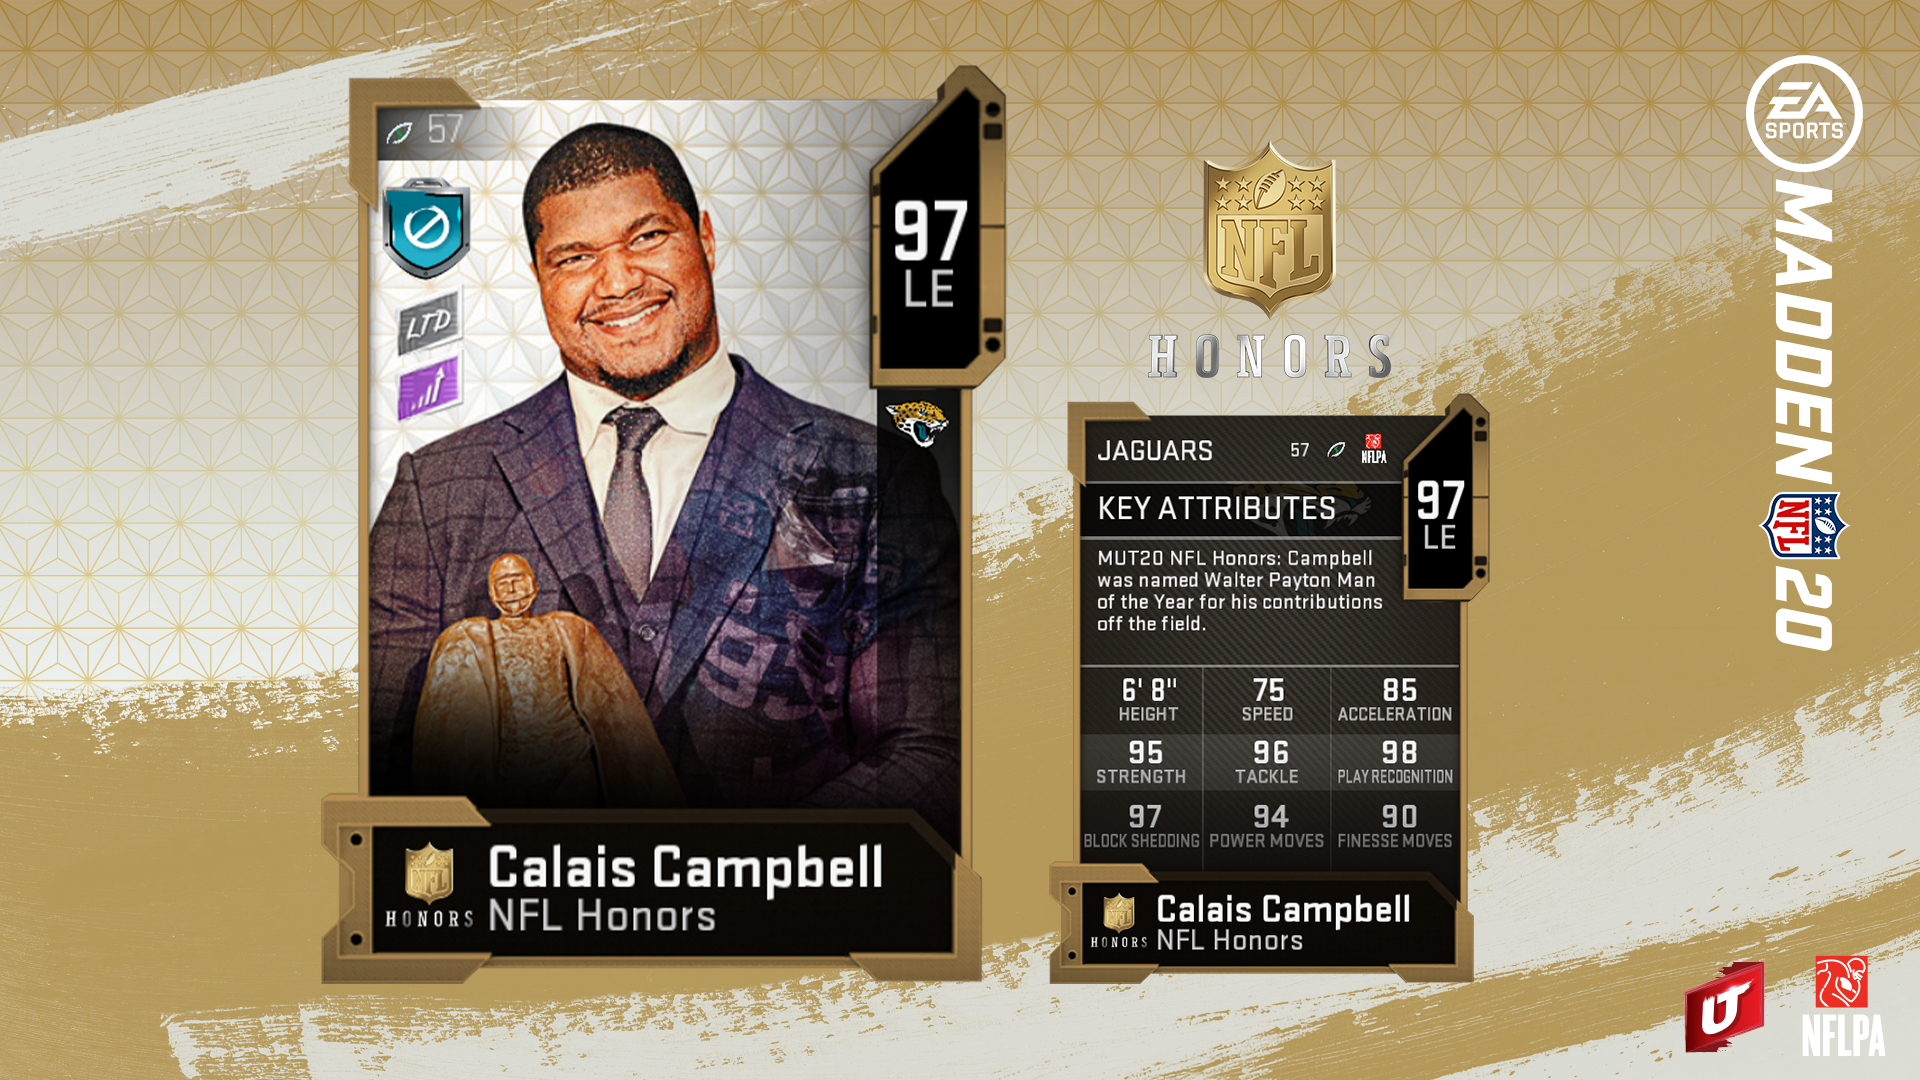 madden 20 nfl honors card for calais campbell